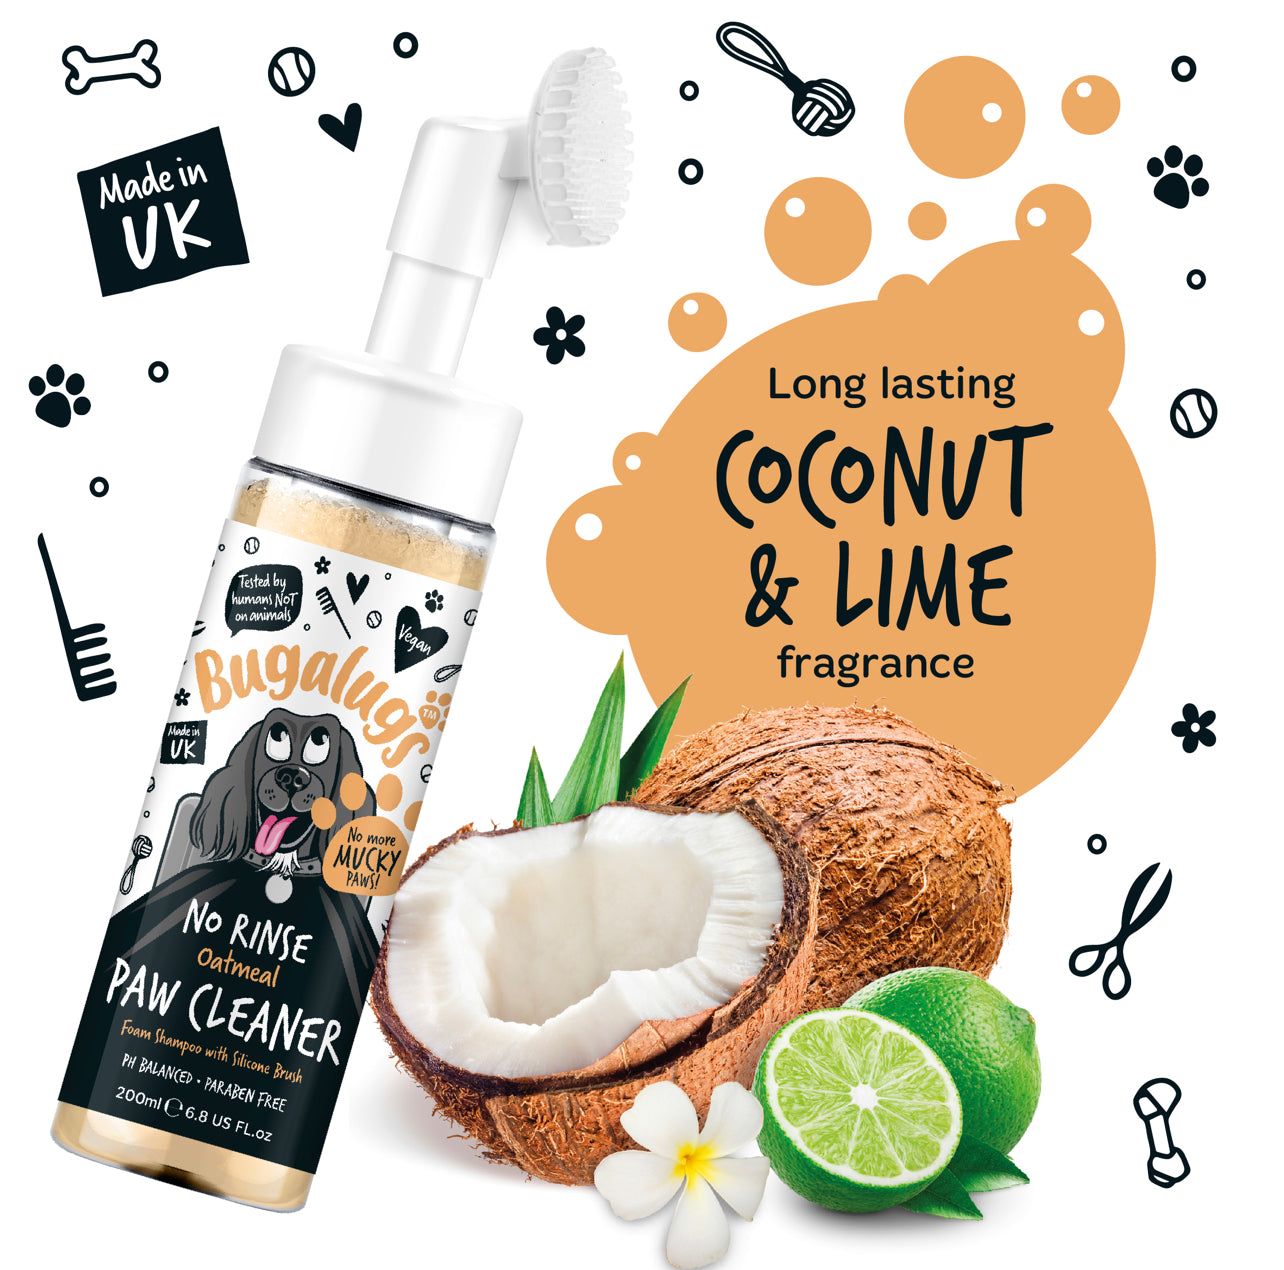 Bugalugs - No Rinse Paw Cleaner Oatmeal ( Coconut & Lime )